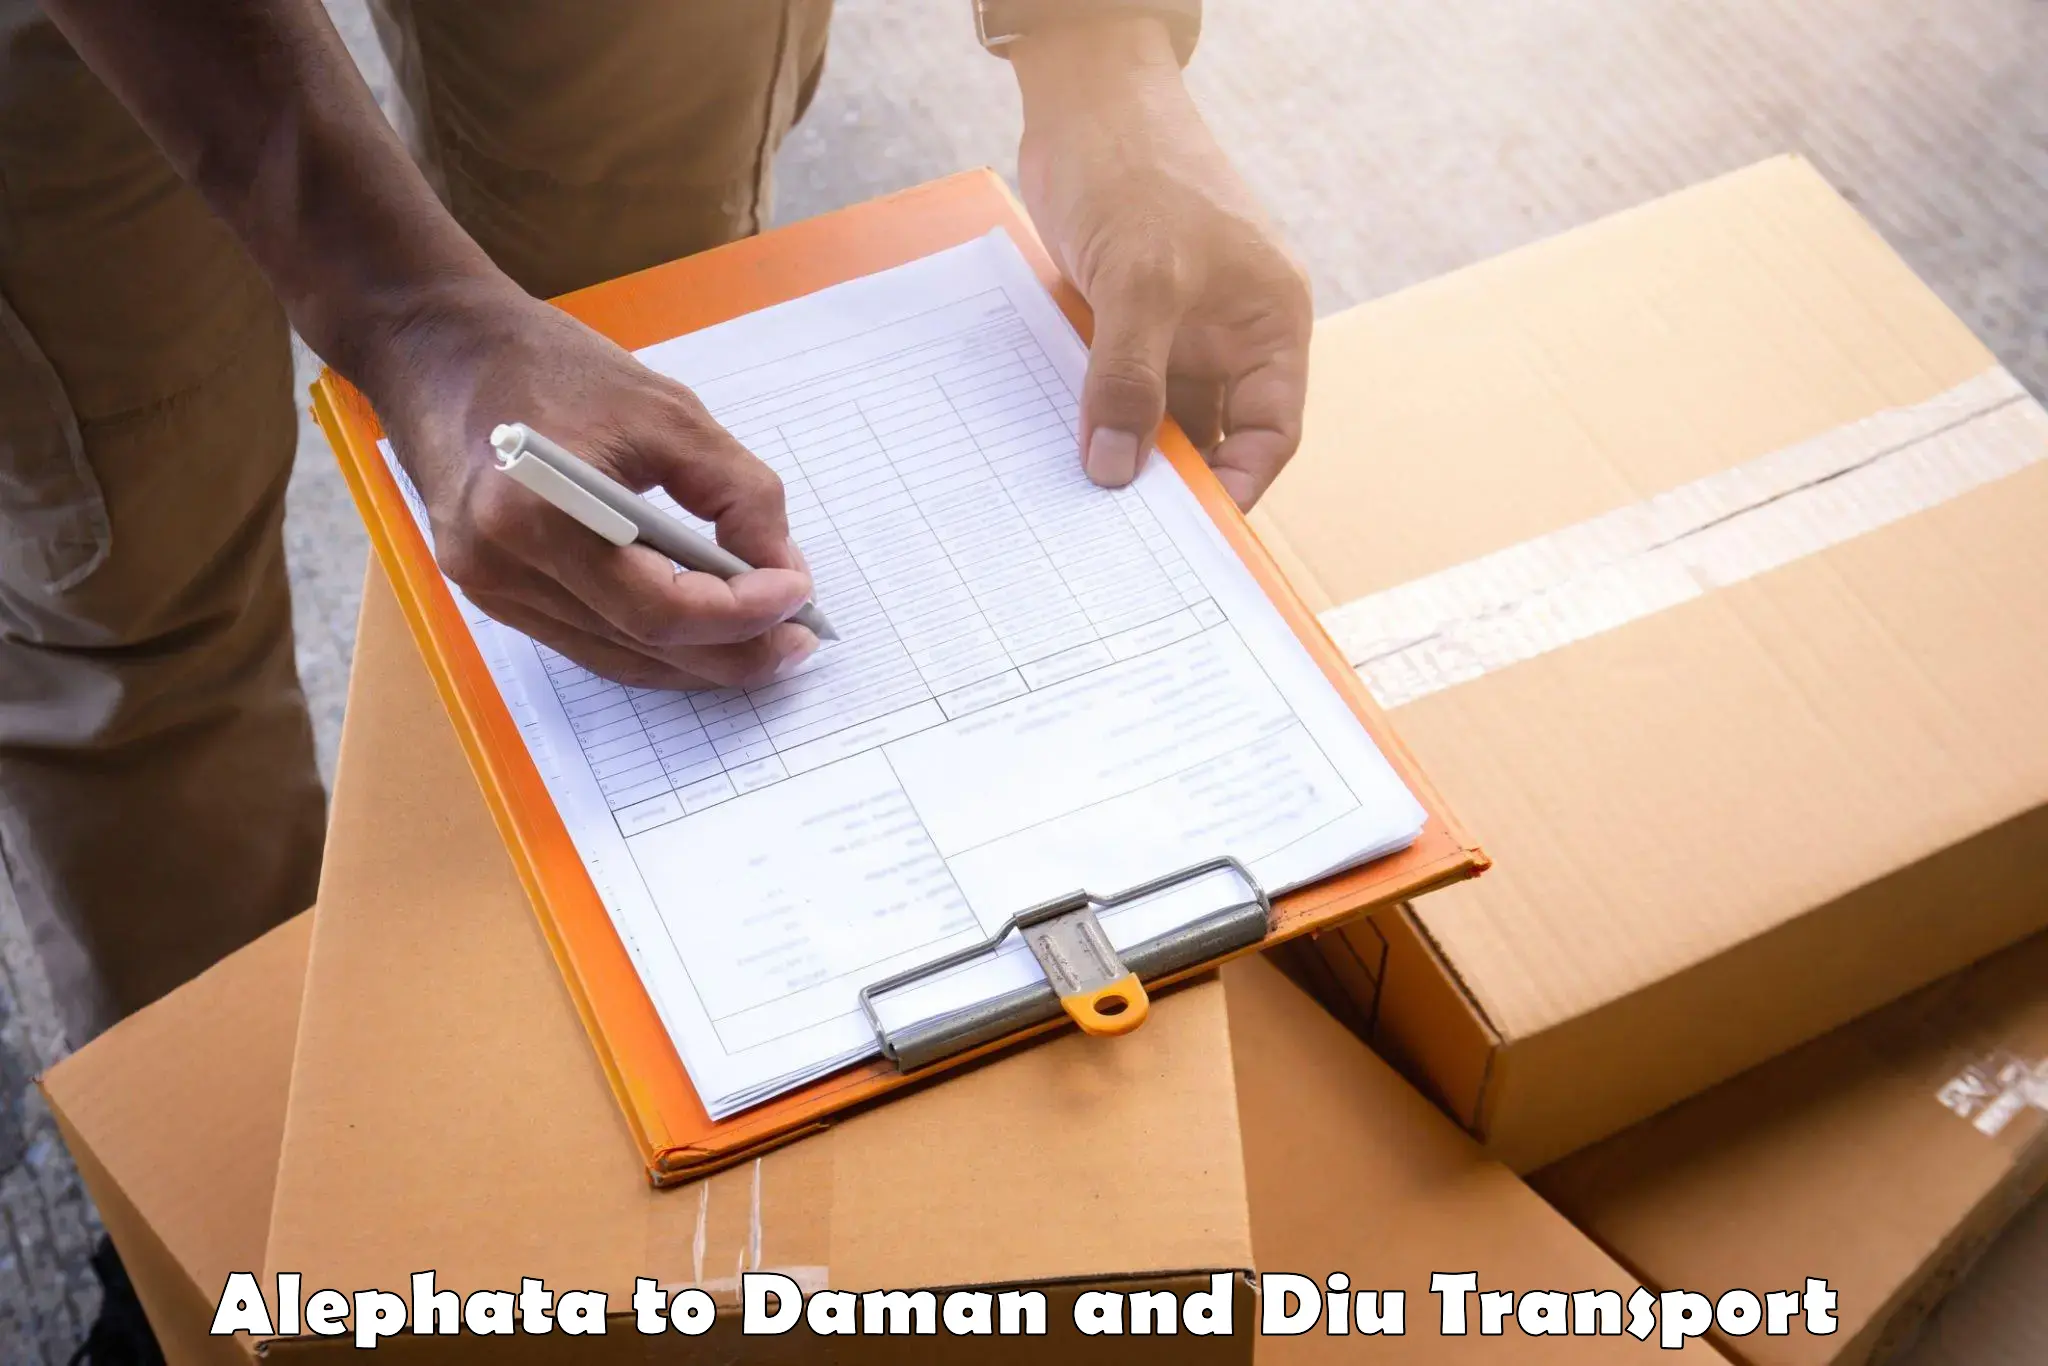 Daily parcel service transport Alephata to Diu